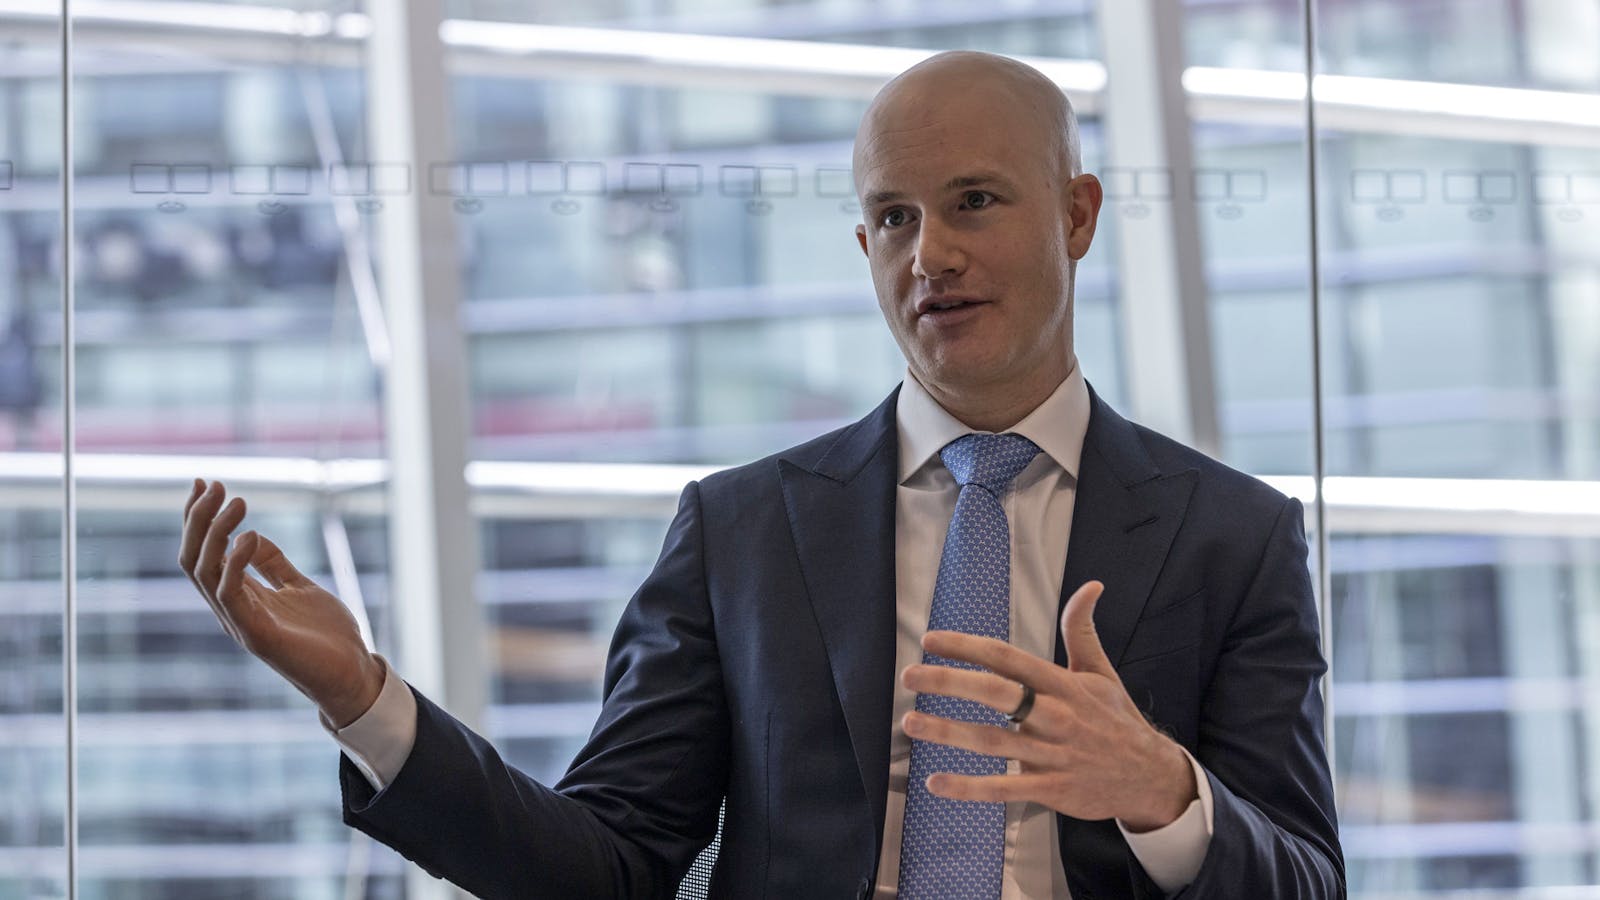 Brian Armstrong, chairman and chief executive officer of Coinbase Global Inc., during an interview in New York, US, on Wednesday, March 1, 2023. Photo by Bloomberg.